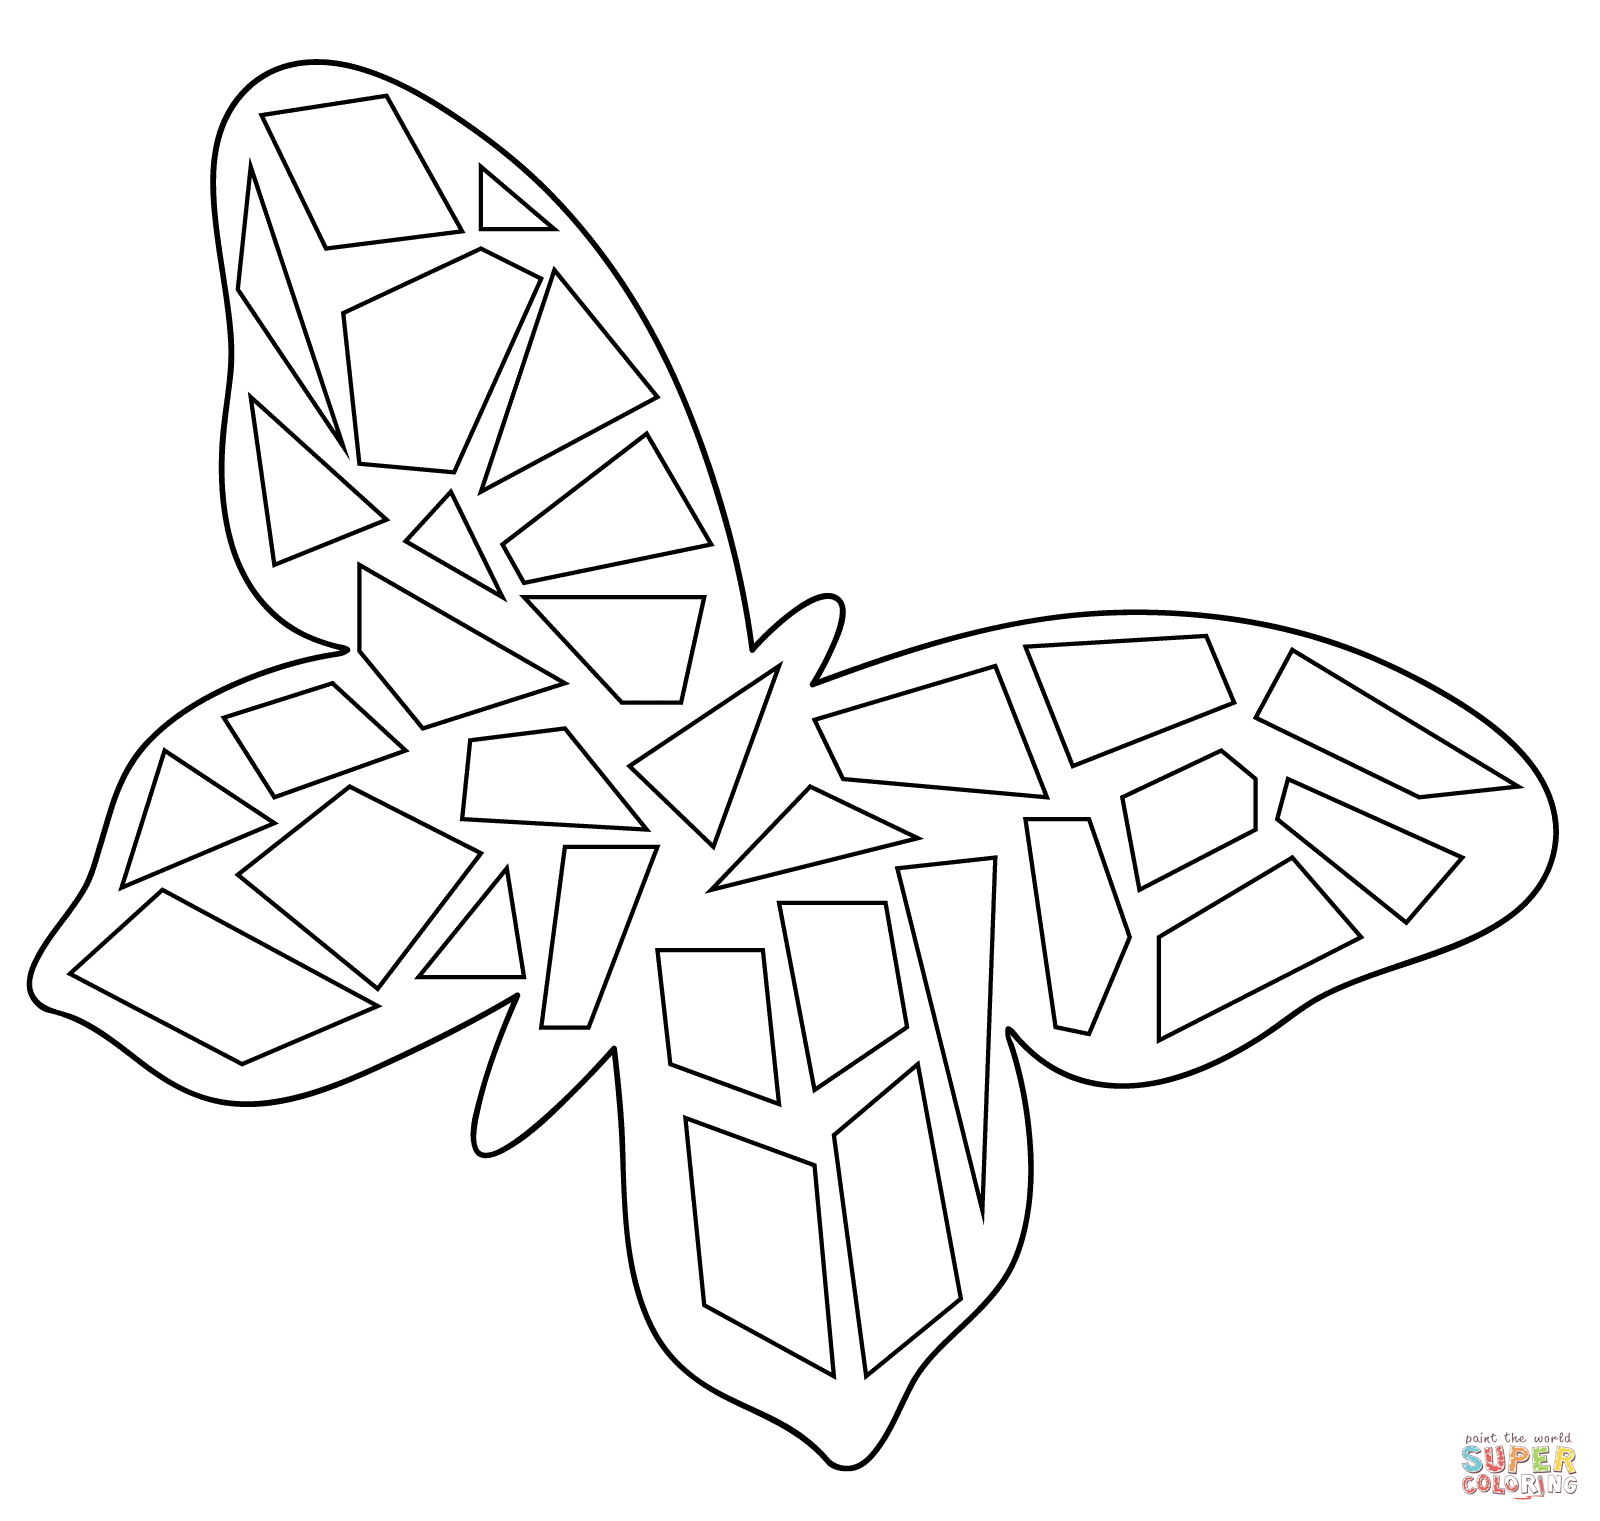 Butterfly Mosaic coloring page | Free Printable Coloring Pages